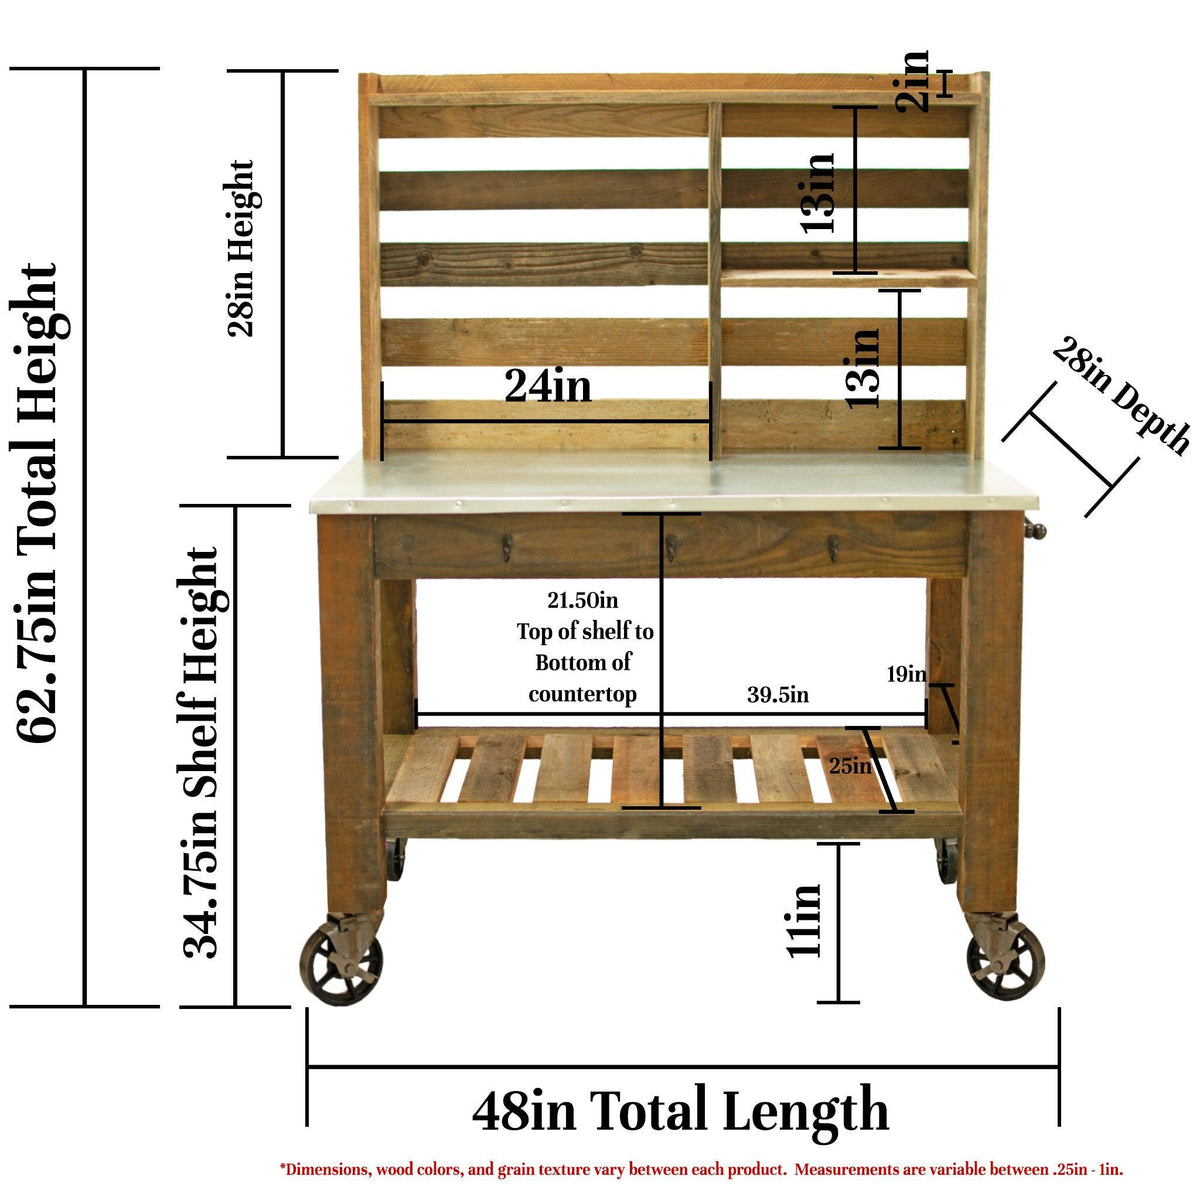 The dimensions and specs of Lee Display's Outdoor Redwood Potting Table.  On sale at leedisplay.com